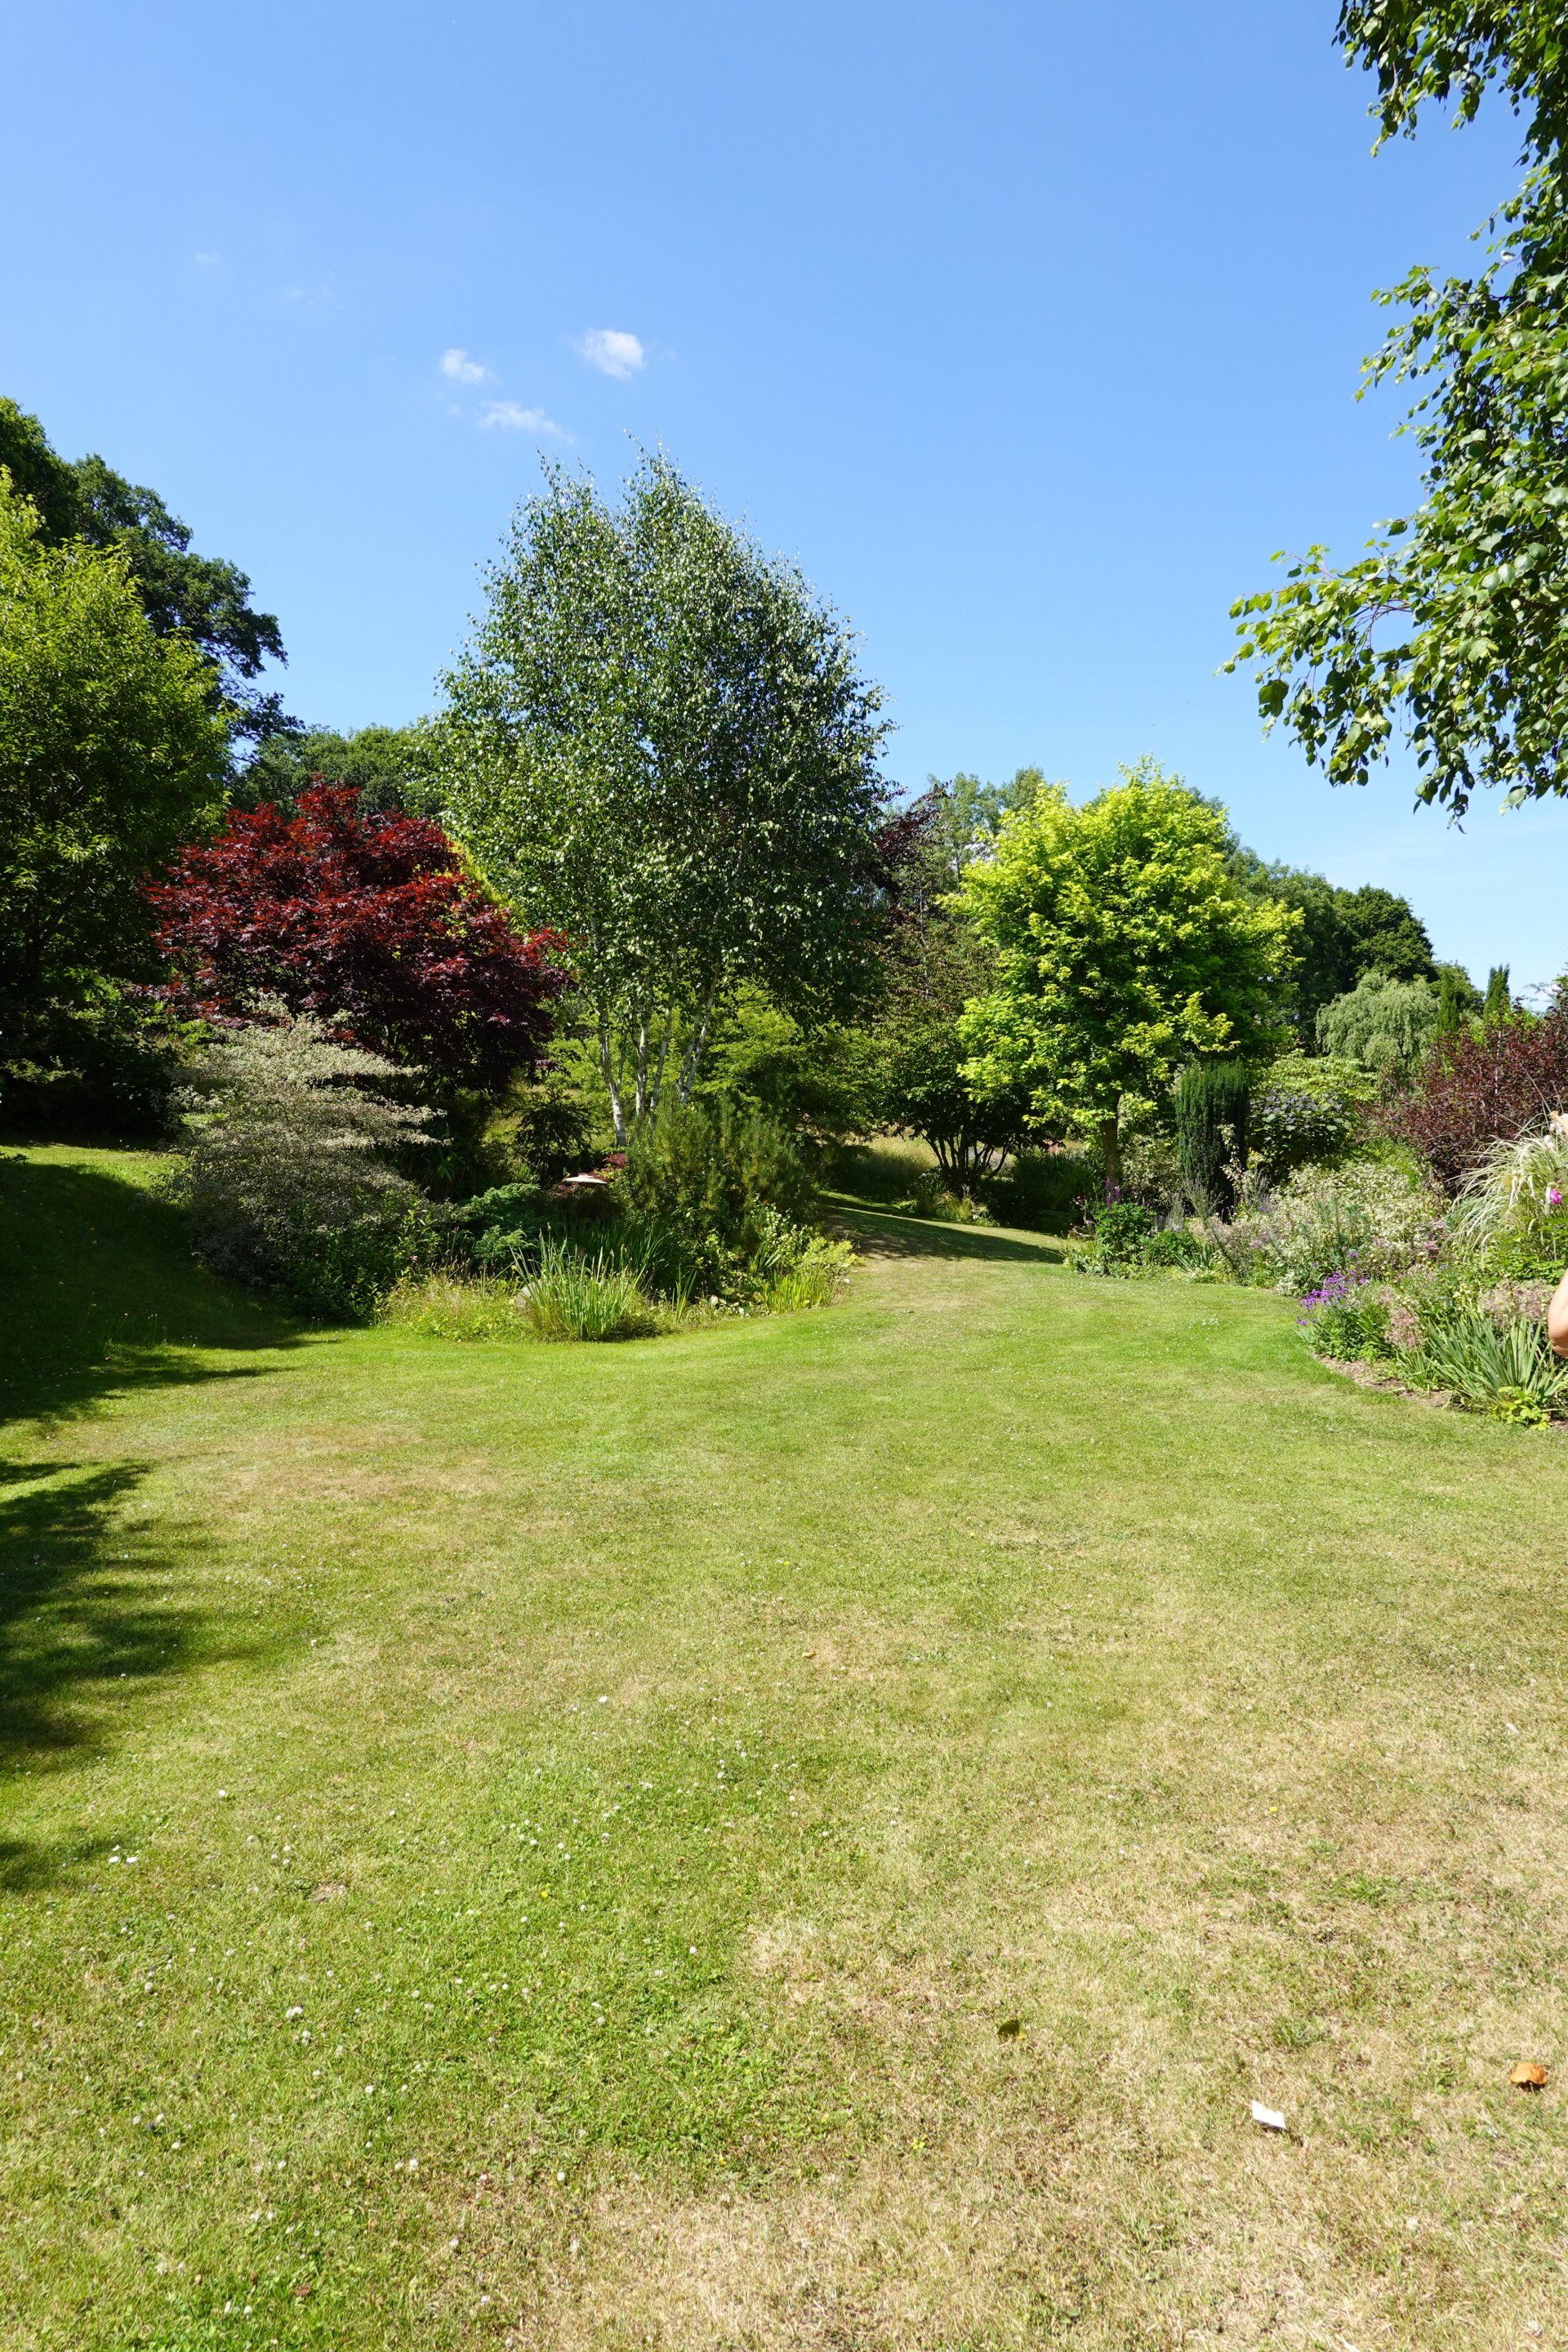 Lawn, trees and shrubs